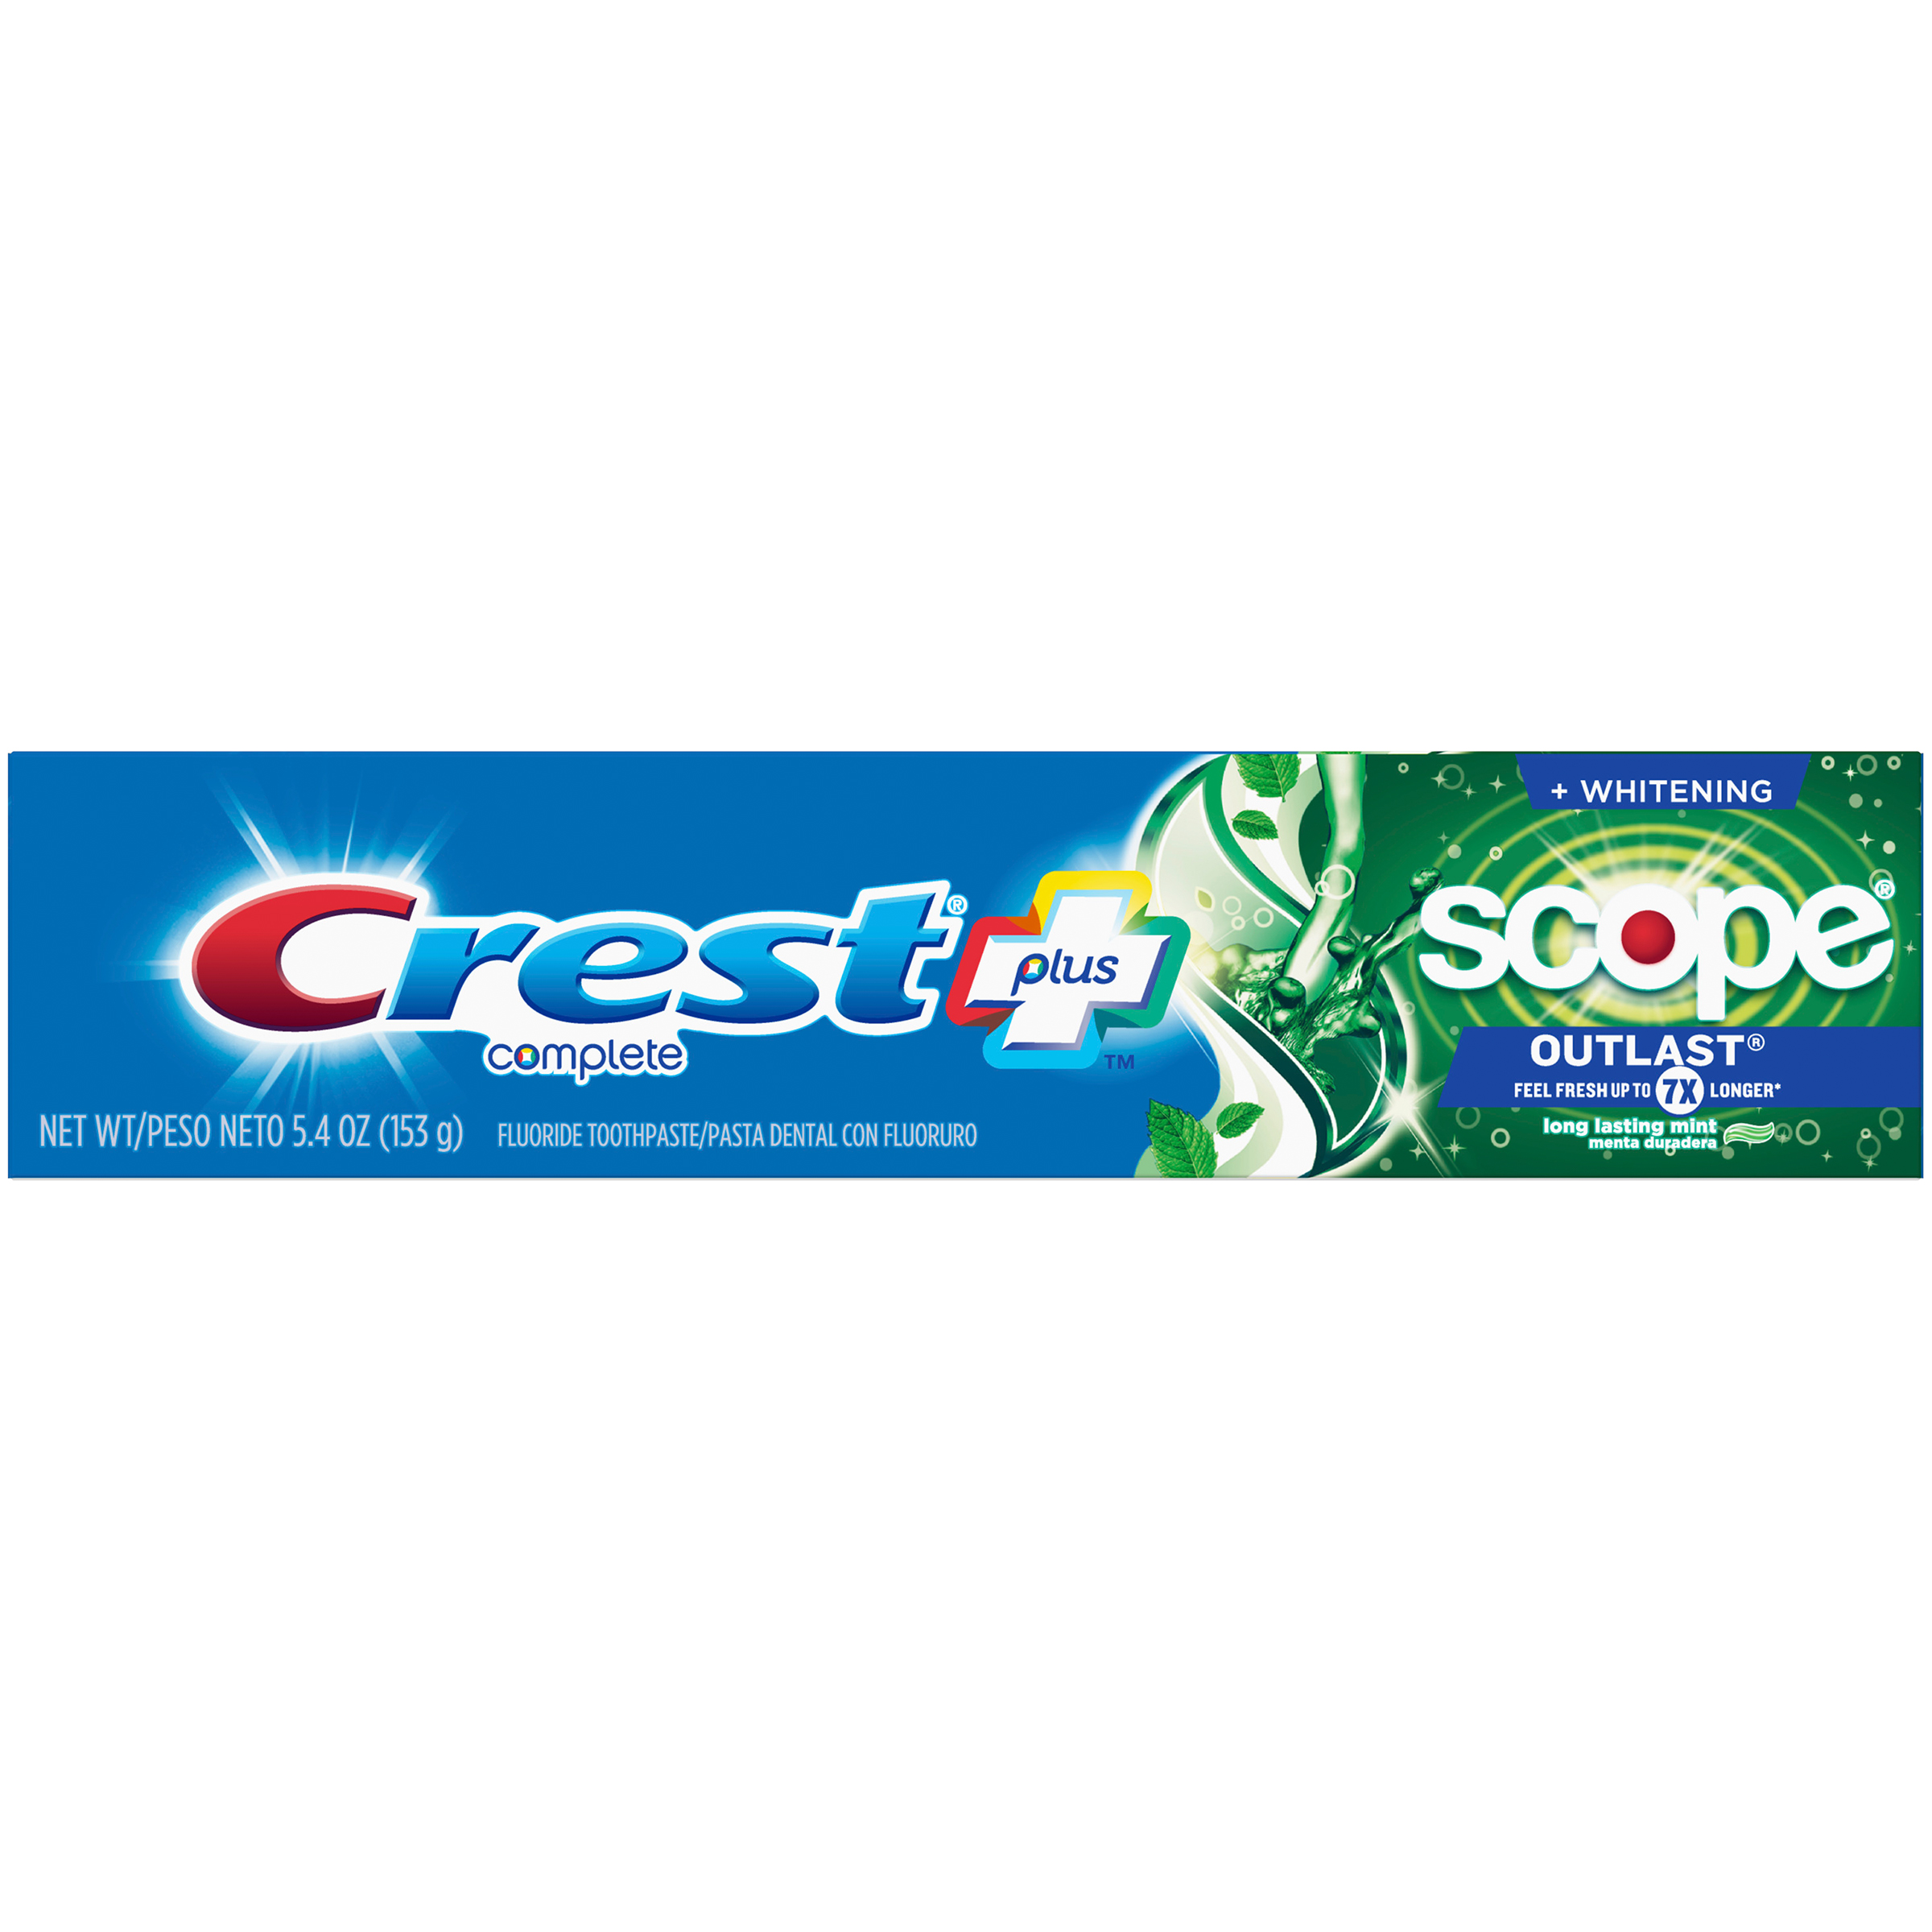 Crest  + Scope Outlast Complete Whitening Toothpaste, Mint, 5.4 oz